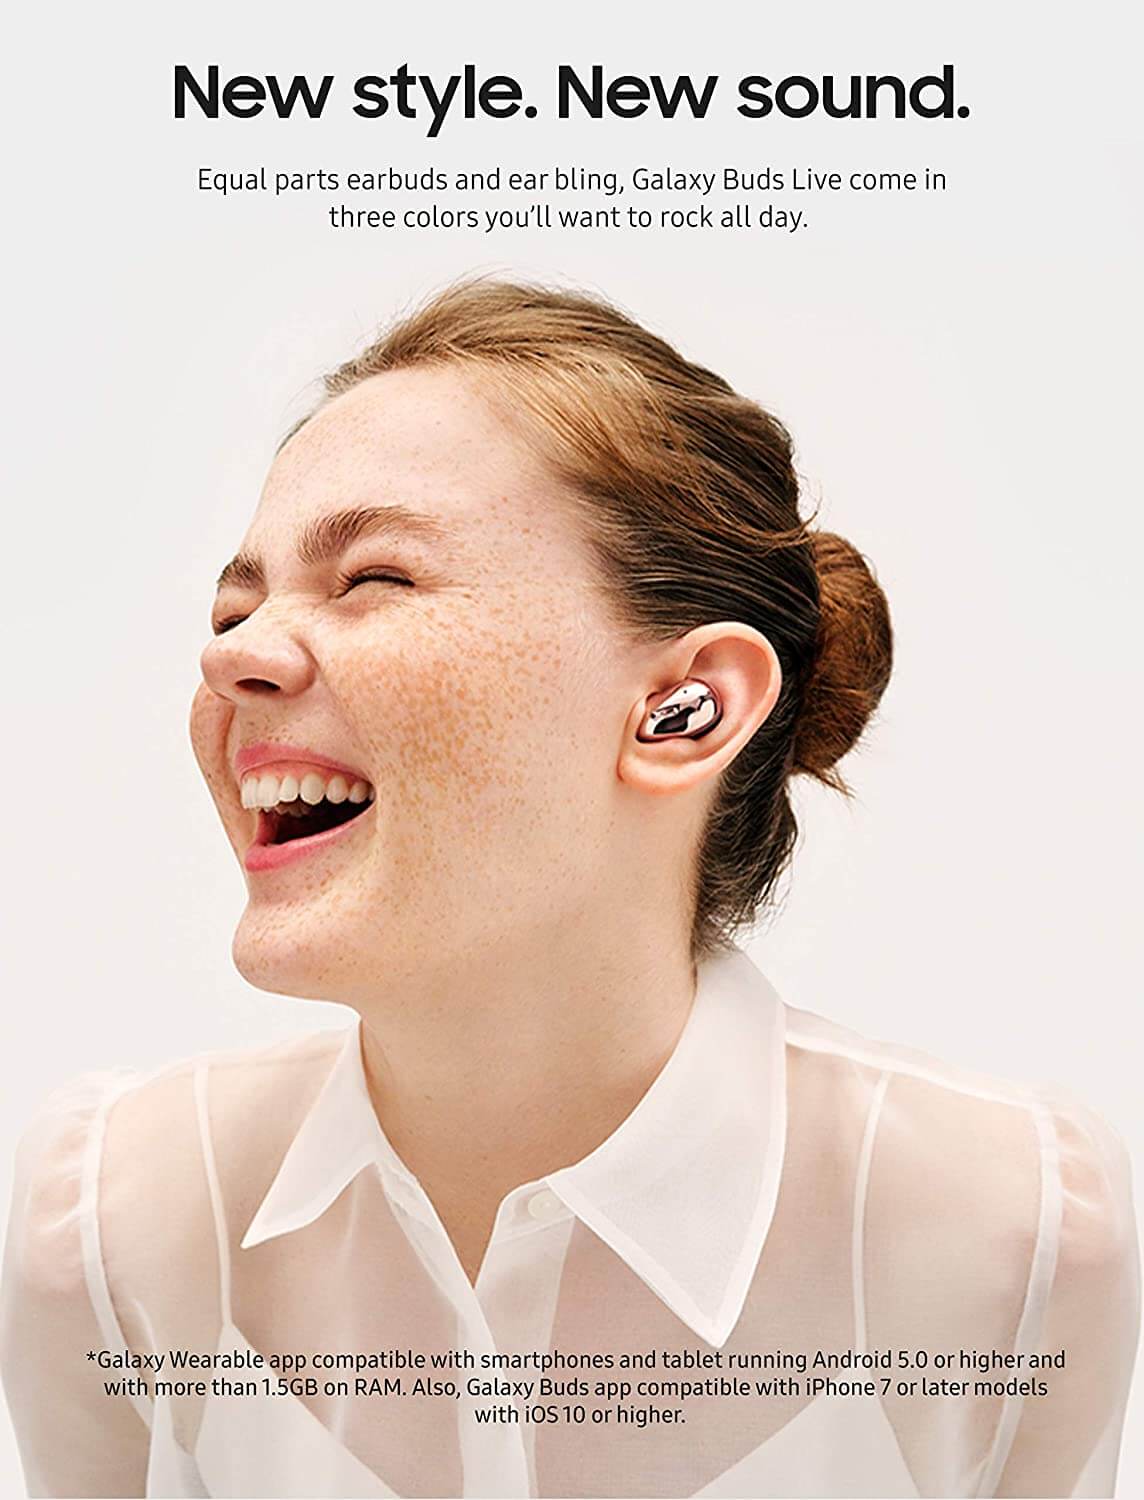 Samsung Galaxy Buds Live Earbuds About Mobile Apps And Techs